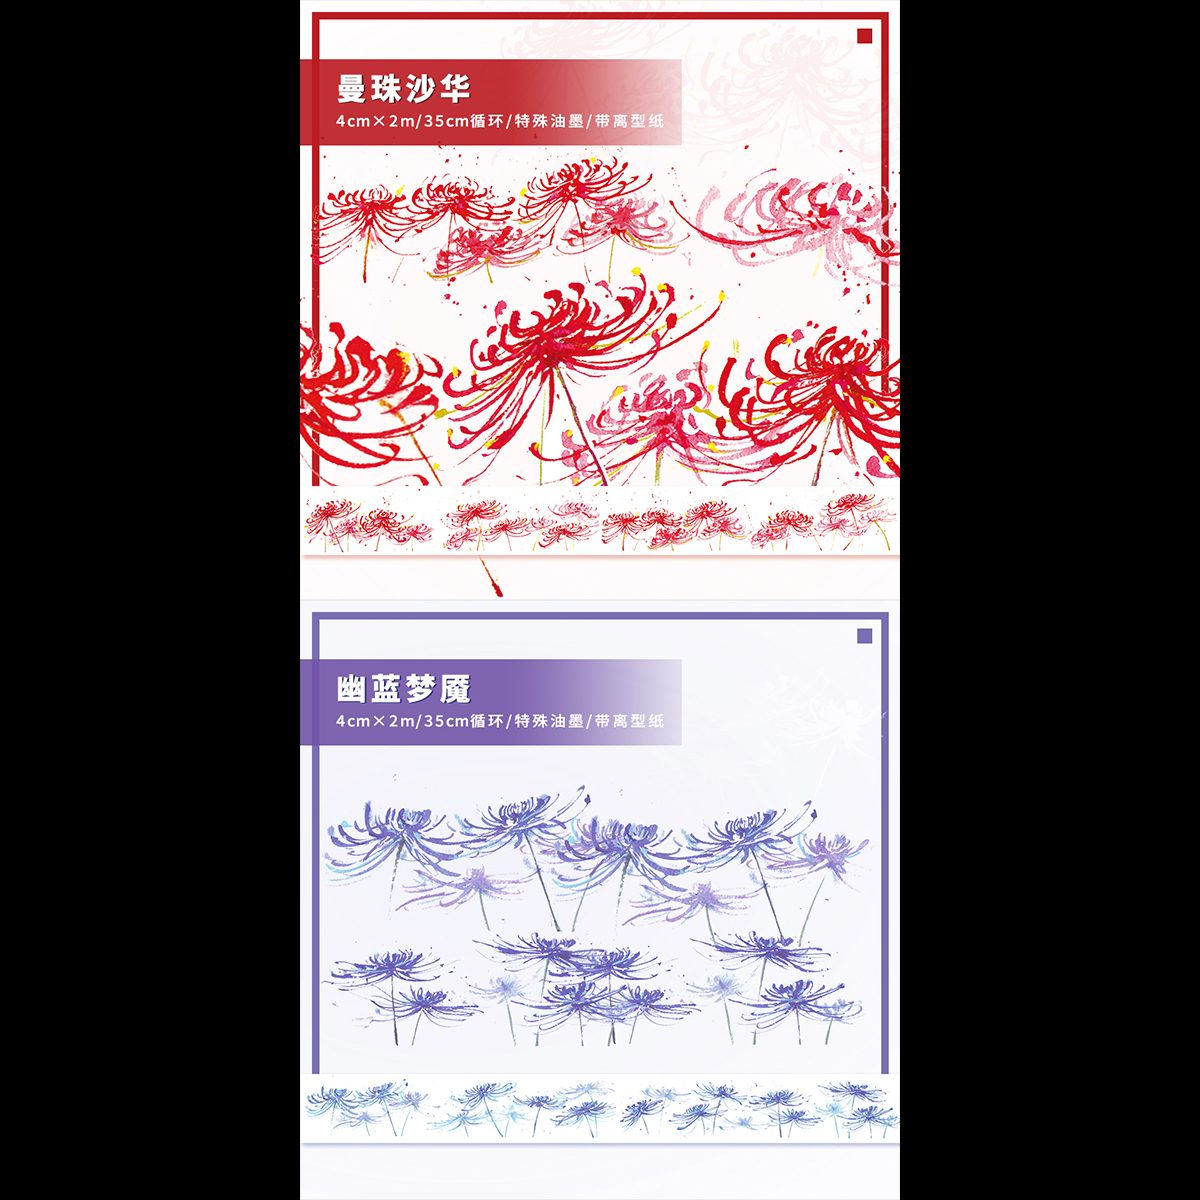 Other Shore Flower (2)ceenie 【 November new 】 Flowers and plants Fruits Desserts Hand account Paper and tape special printing ink Whole volume Hand account adhesive tape